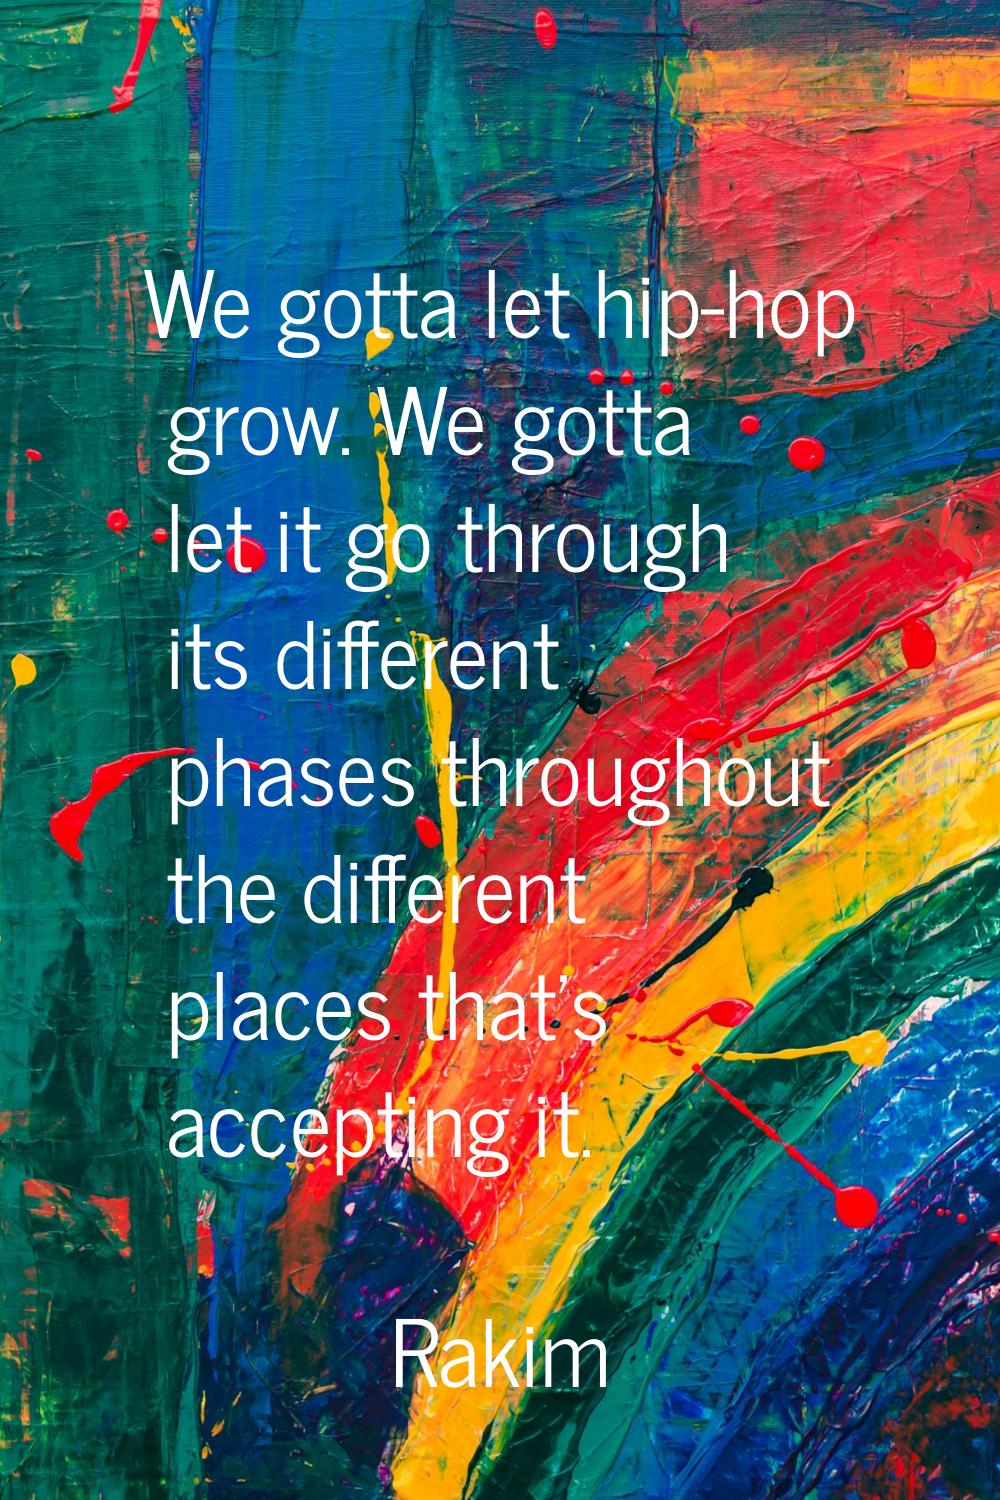 We gotta let hip-hop grow. We gotta let it go through its different phases throughout the different